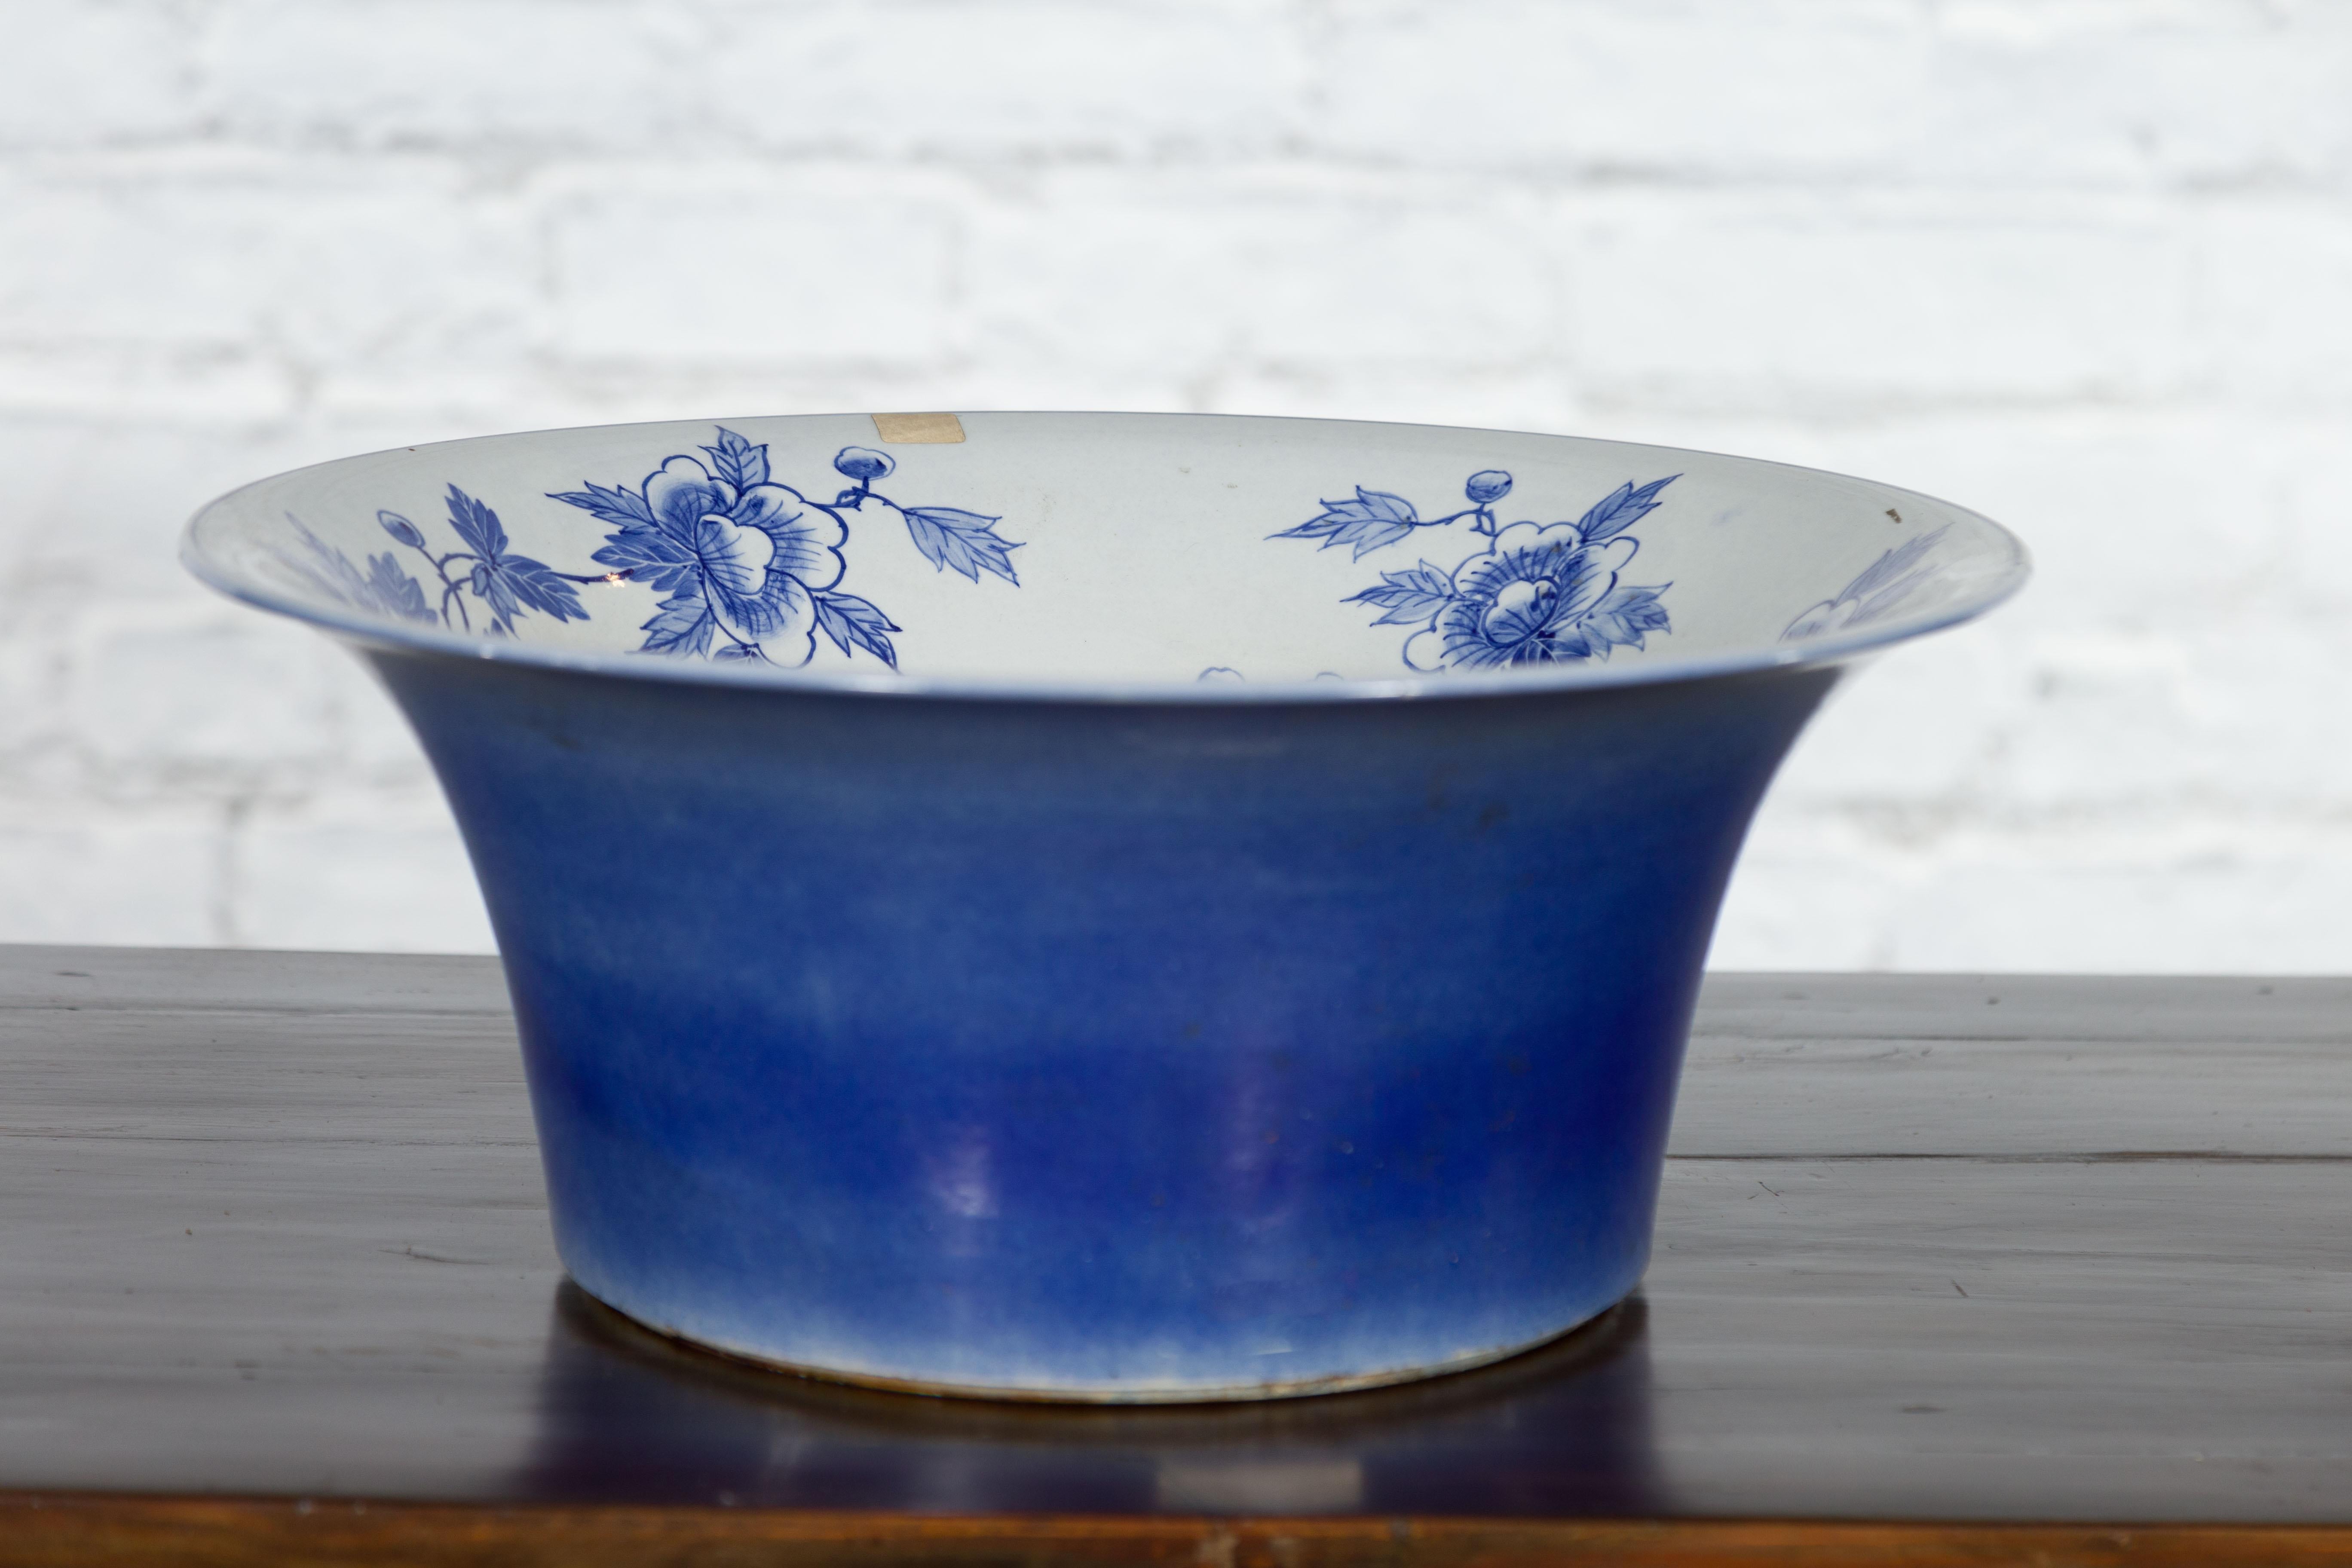 Chinese Blue and White Porcelain Wash Basin with Floral Motifs and Cobalt Blue For Sale 7